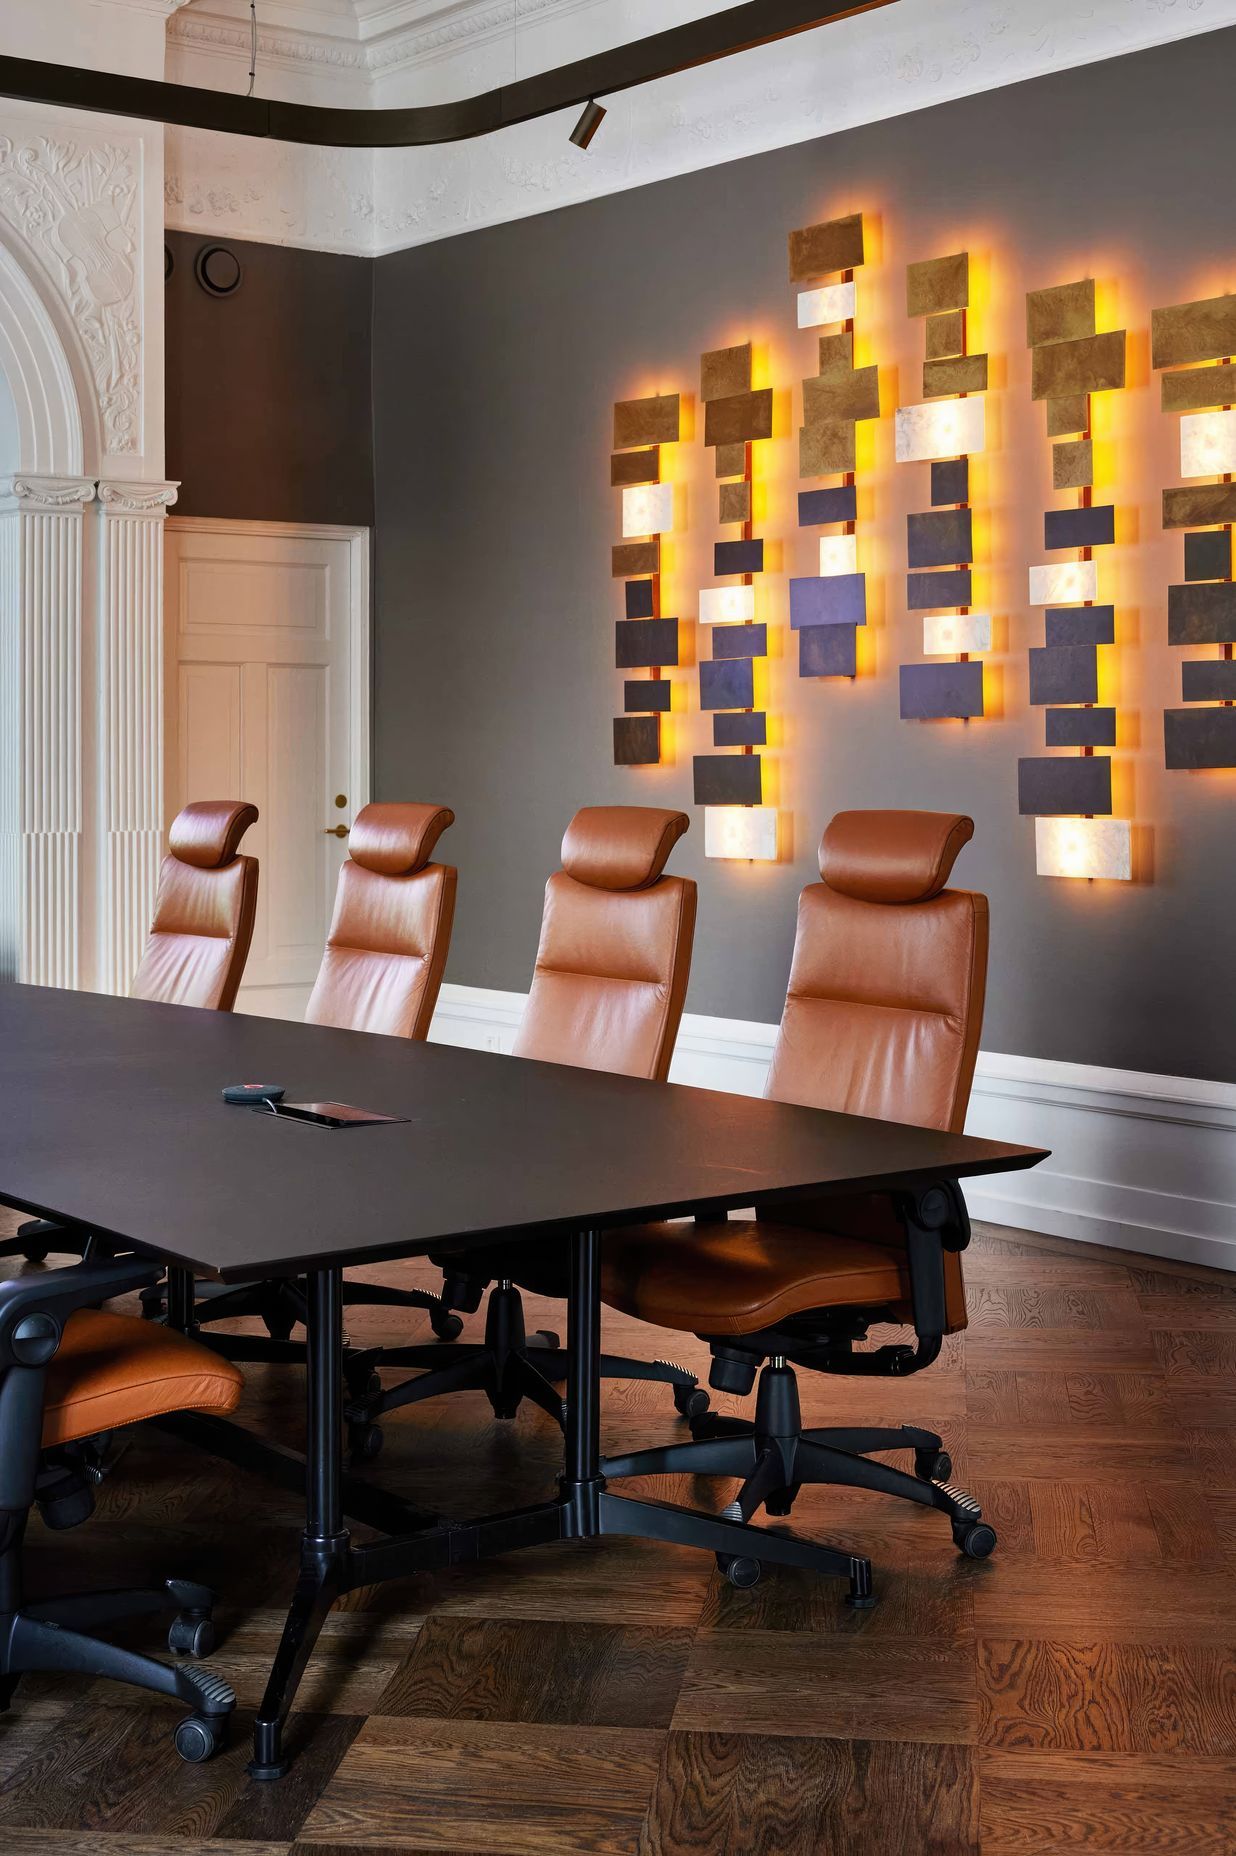 Ergonomic seating in meeting rooms offers flexibility for both focused and collaborative work. HÅG Tribute chairs offered the perfect aesthetic for Forte's boardroom | Forte, Olso